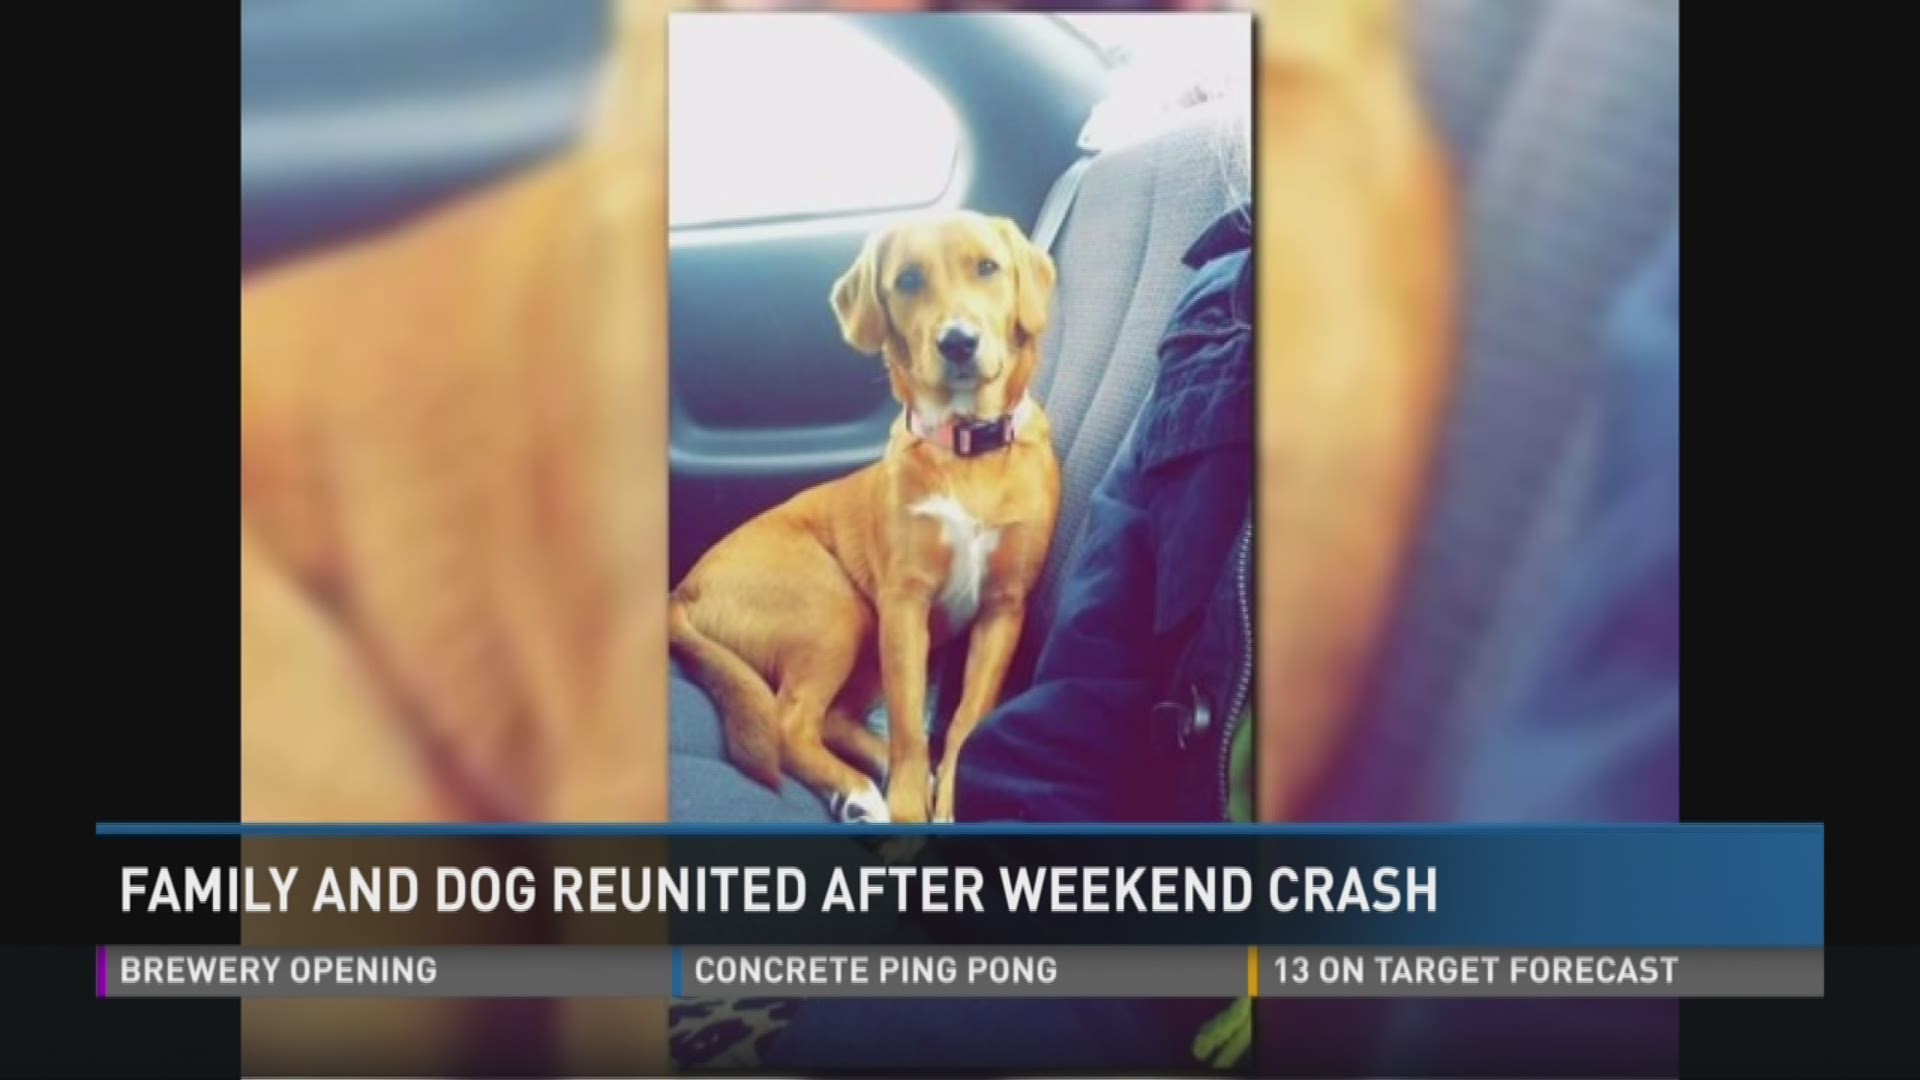 Family and dog reunited after crash